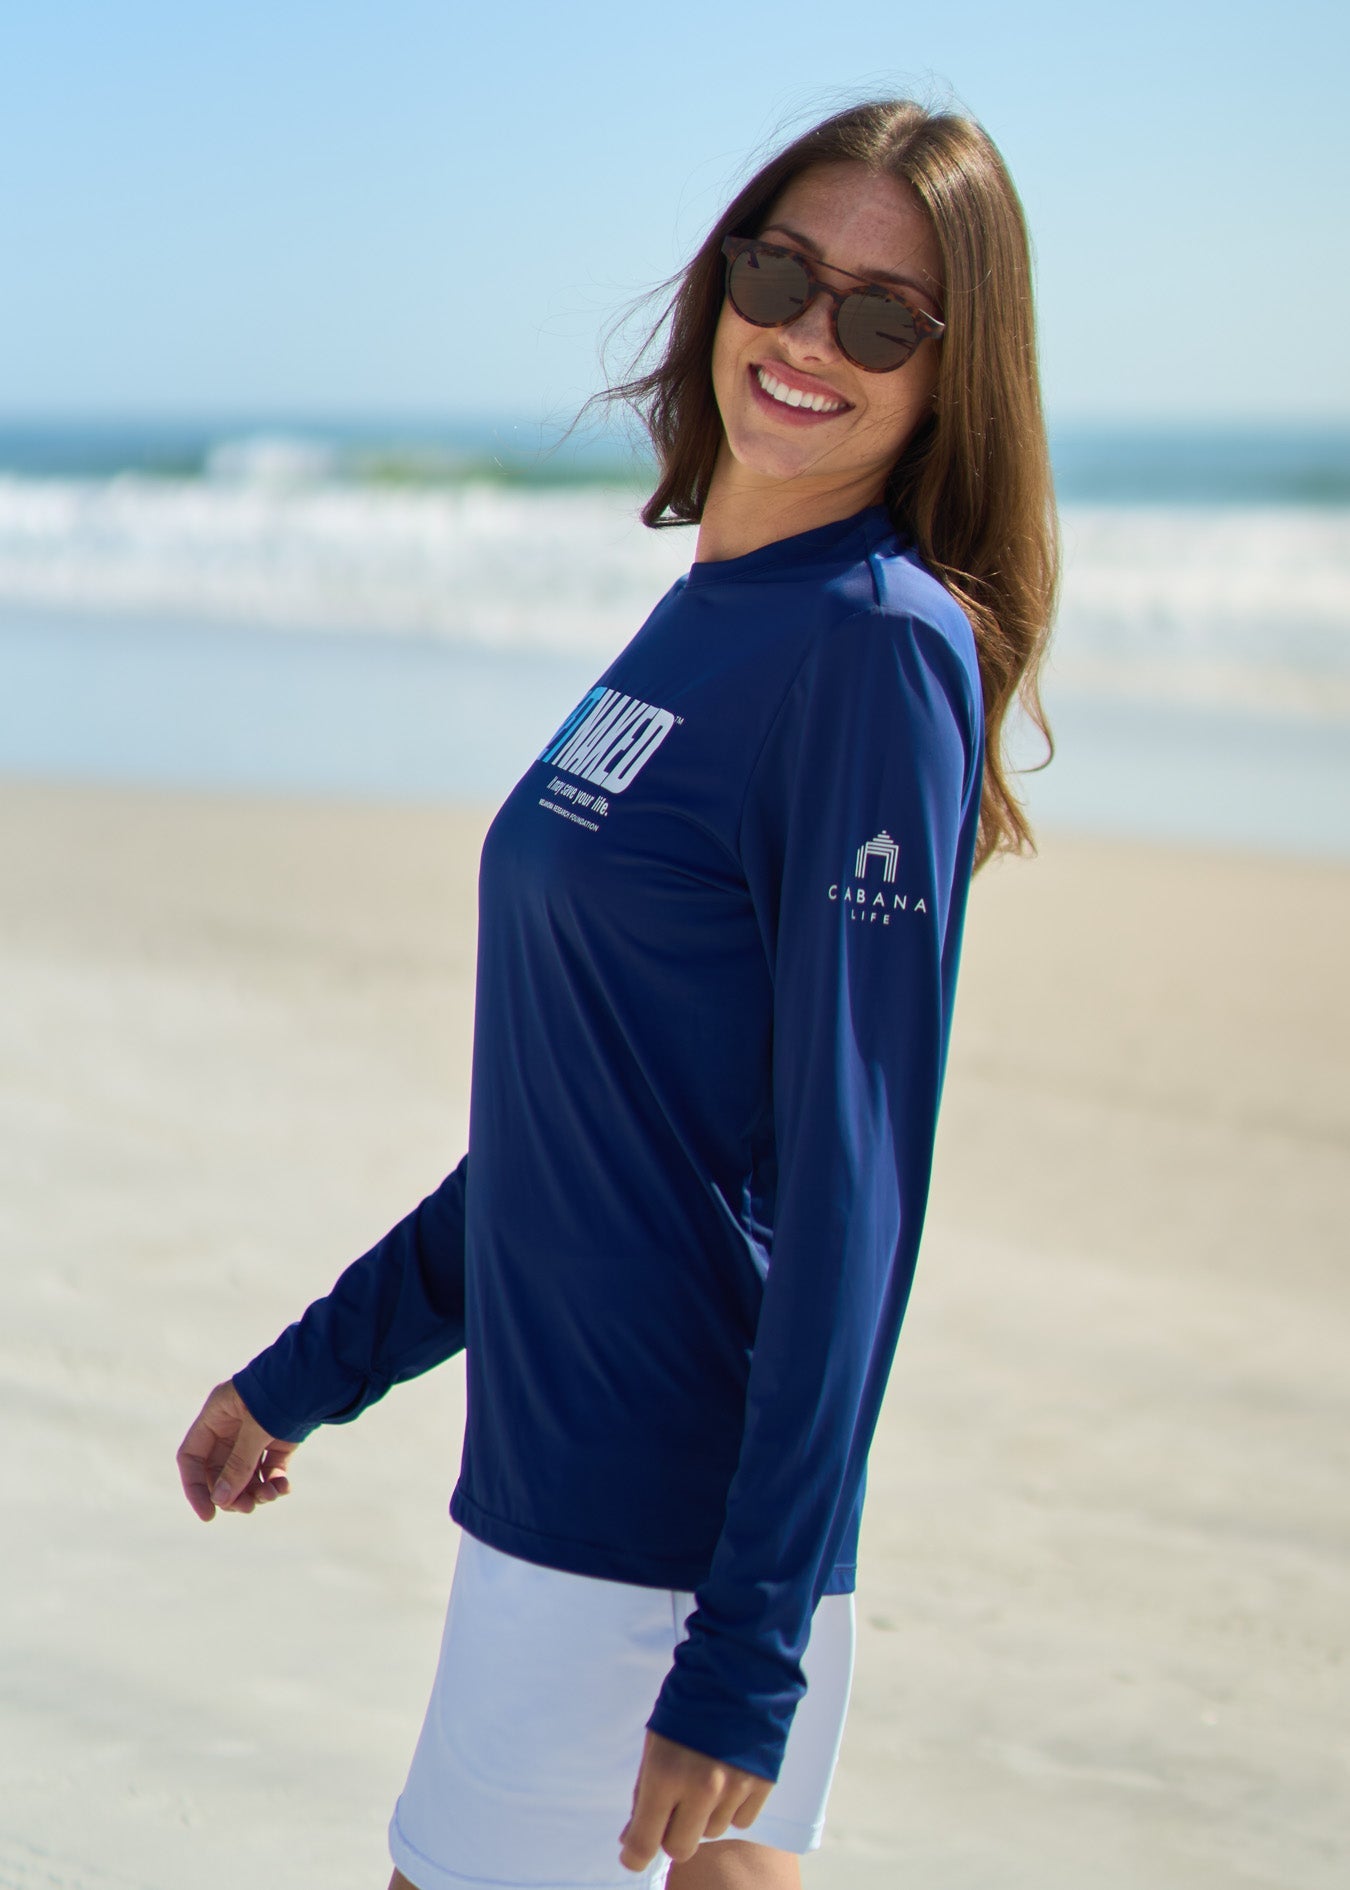 A woman facing to the side on the beach wearing the Get Naked Unisex Performance Shirt and White Skort.